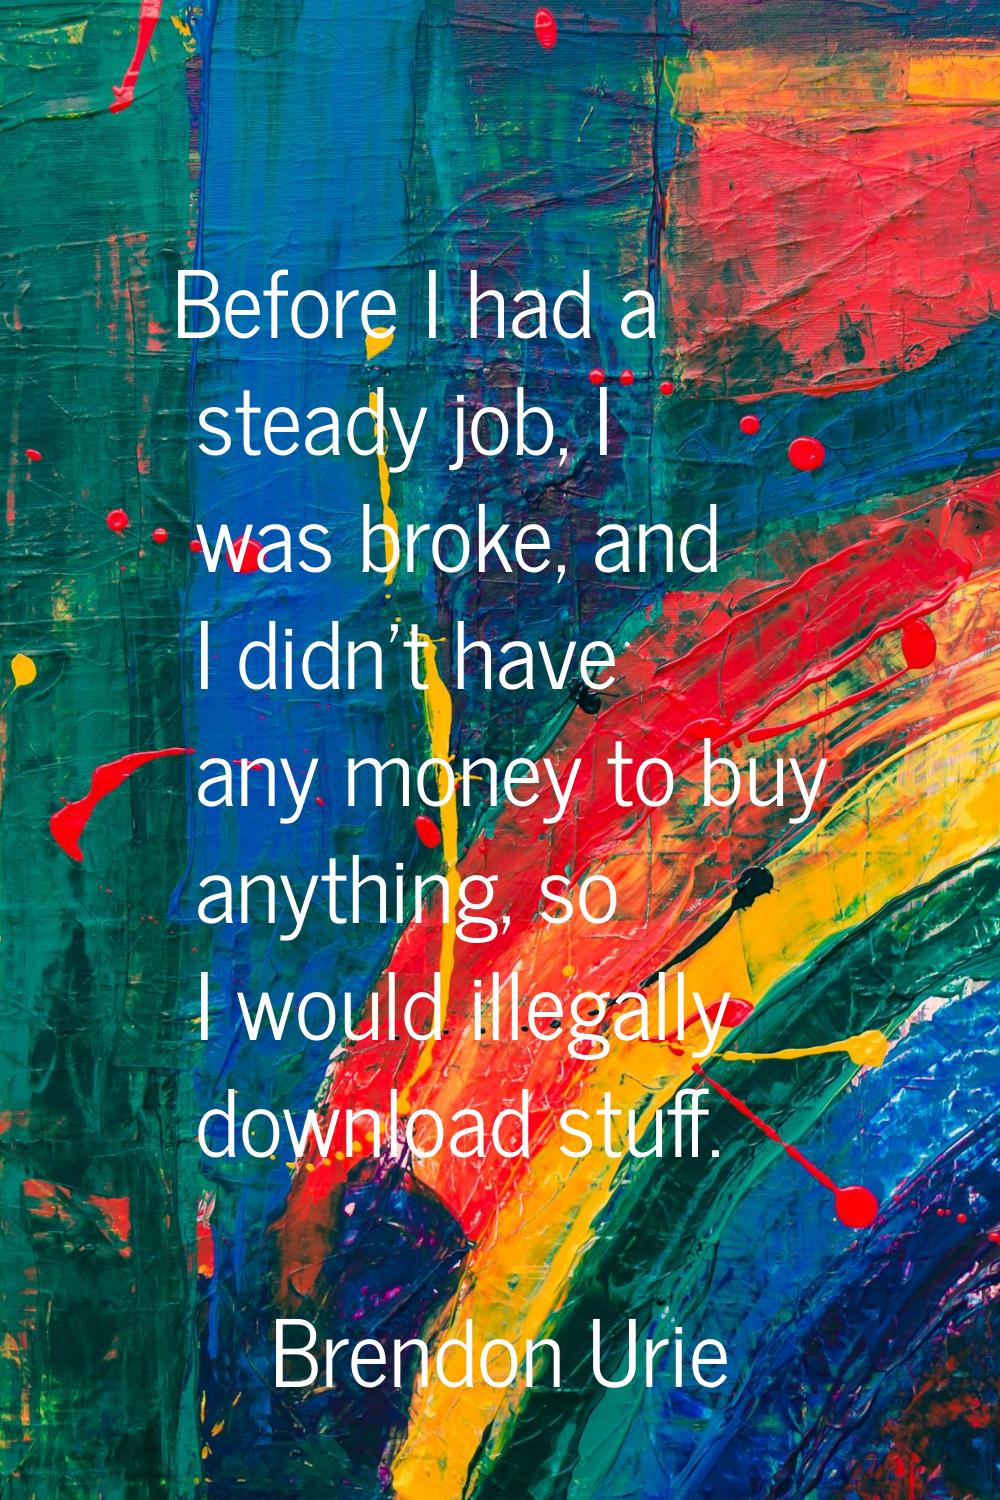 Before I had a steady job, I was broke, and I didn't have any money to buy anything, so I would ill